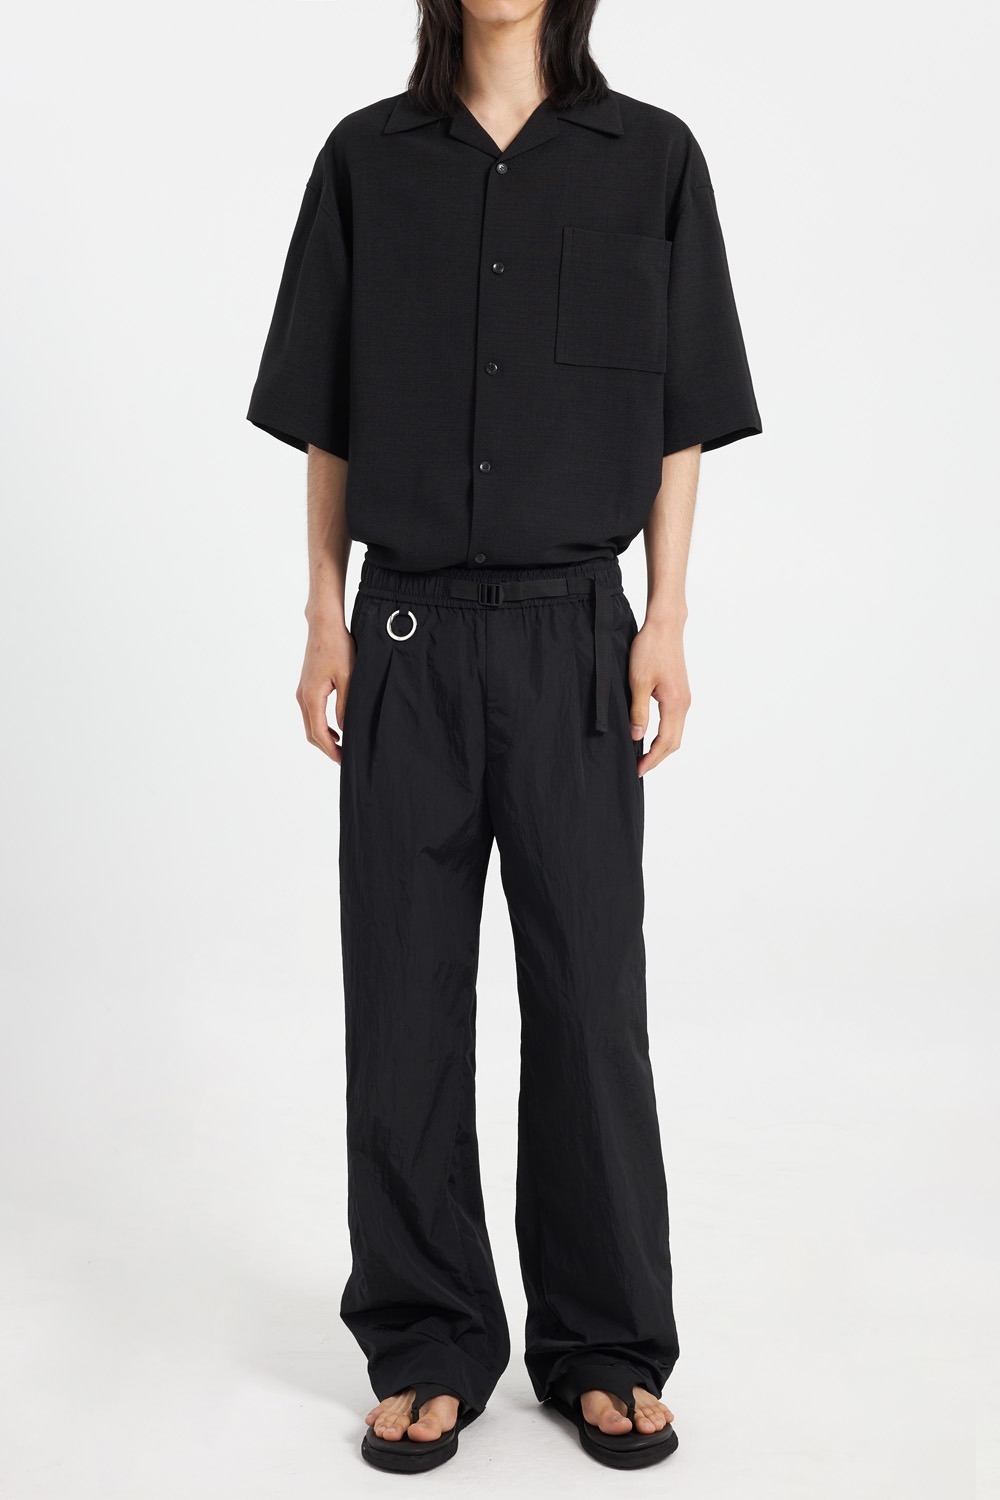 QUINN / Wide Tailored Pants_Black